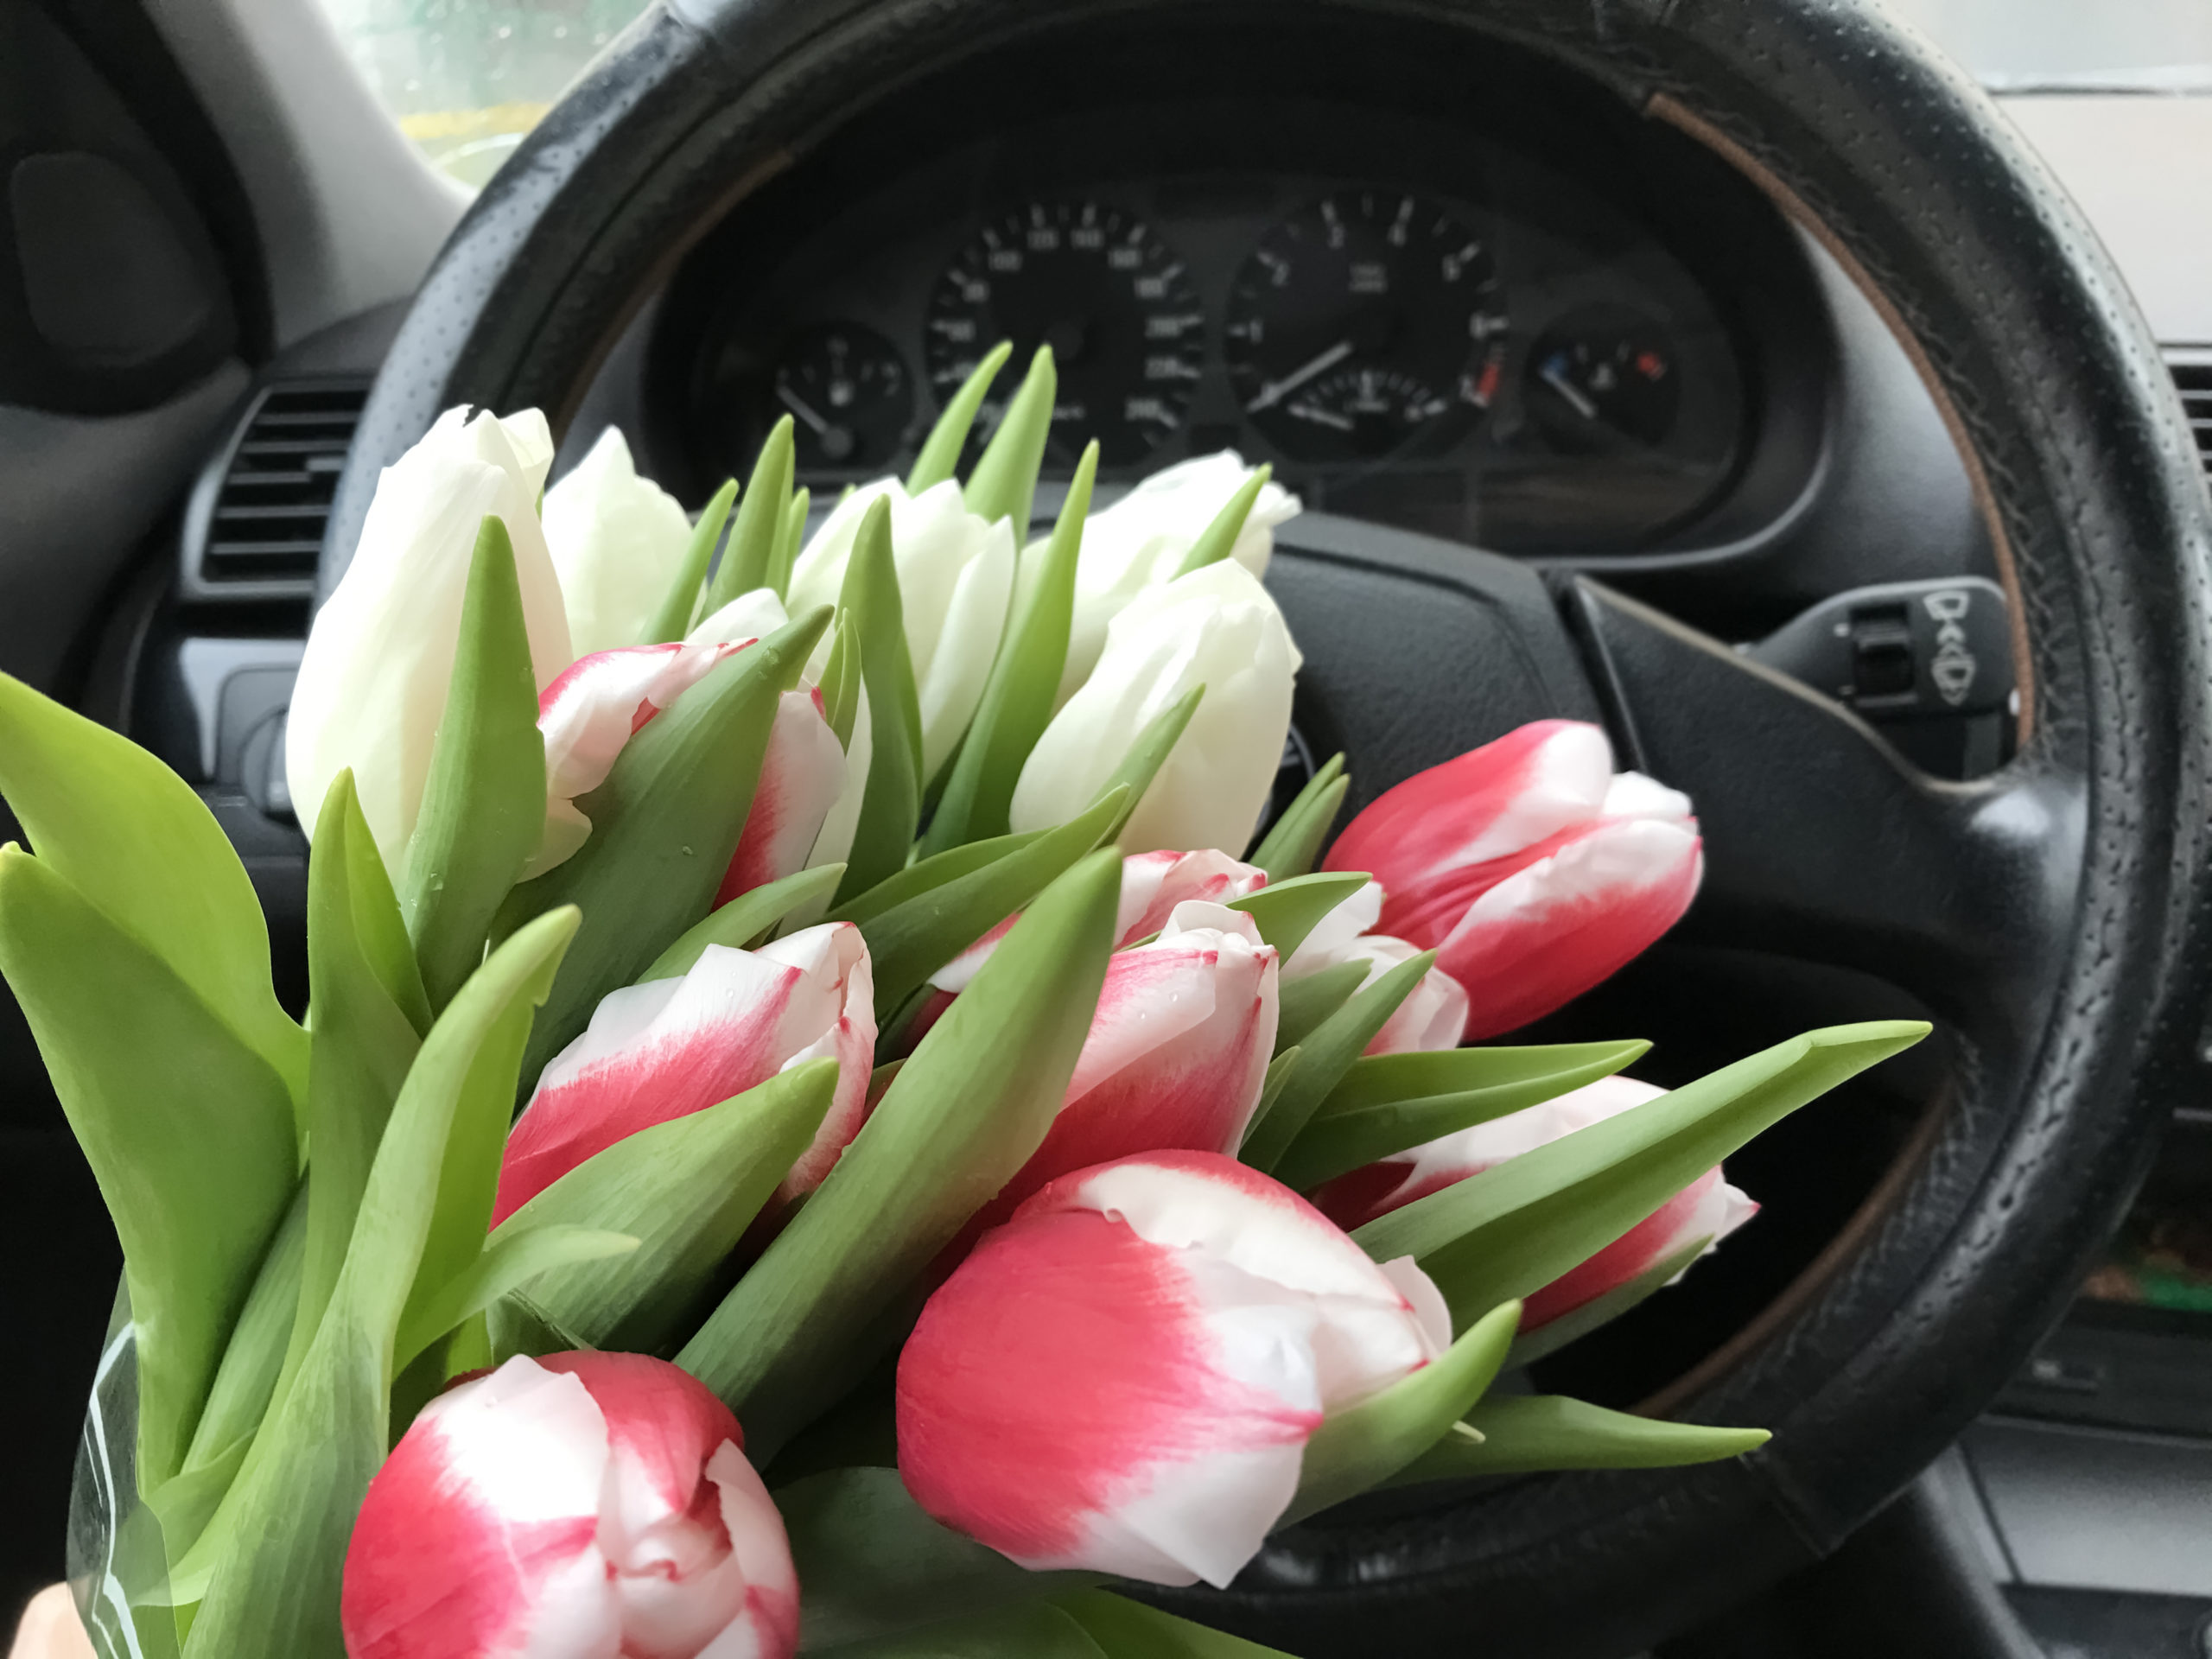 Red and white bouquet of tulips in the car against the background of the steering wheel and dashboard